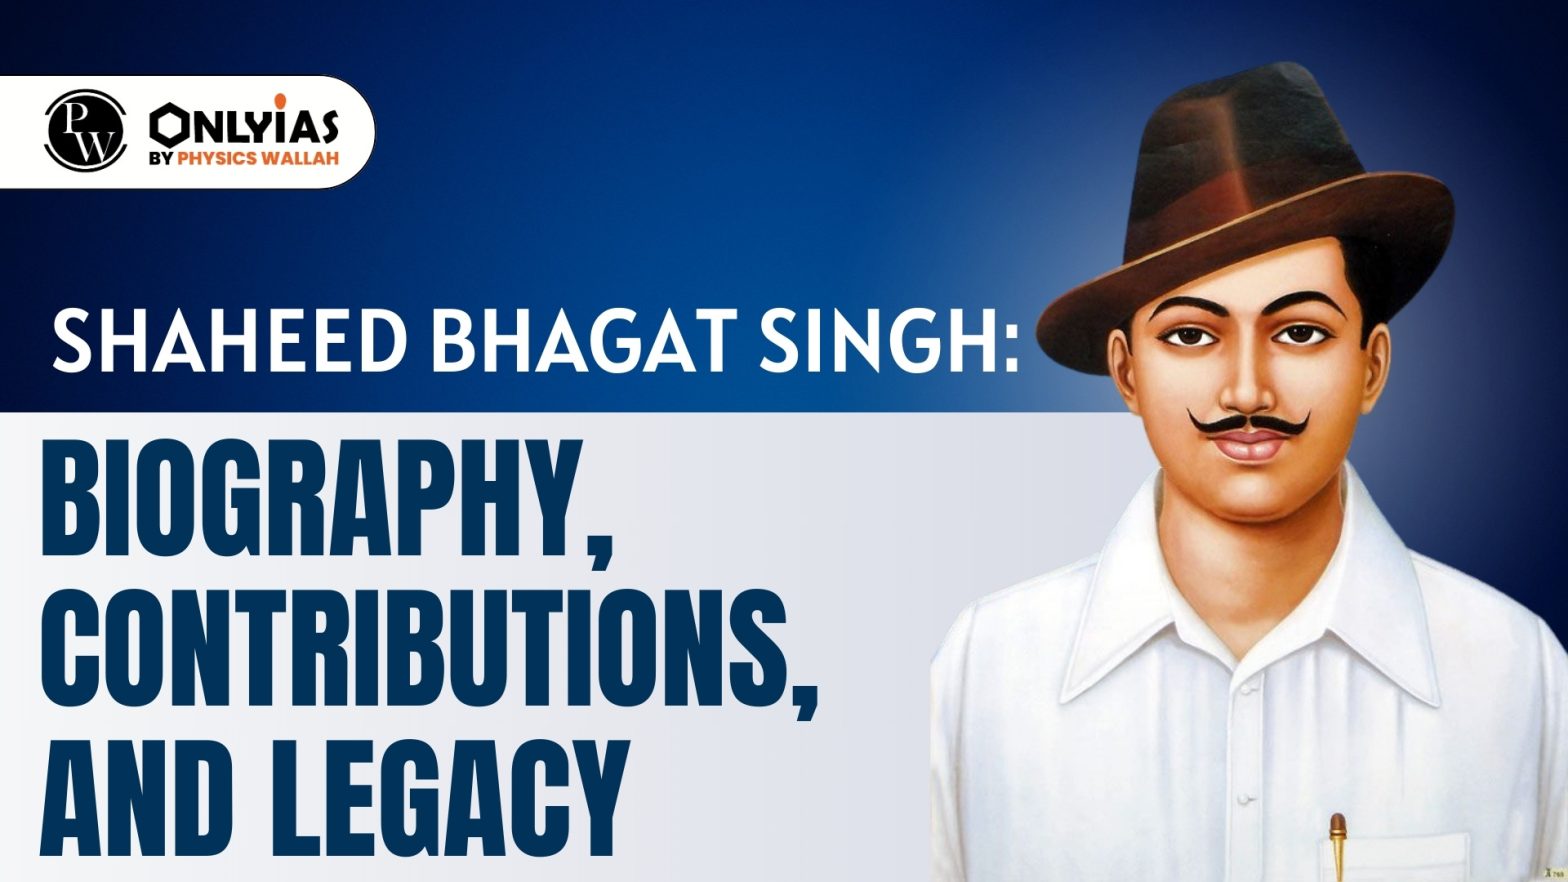 Shaheed Bhagat Singh: Biography, Contributions, and Legacy